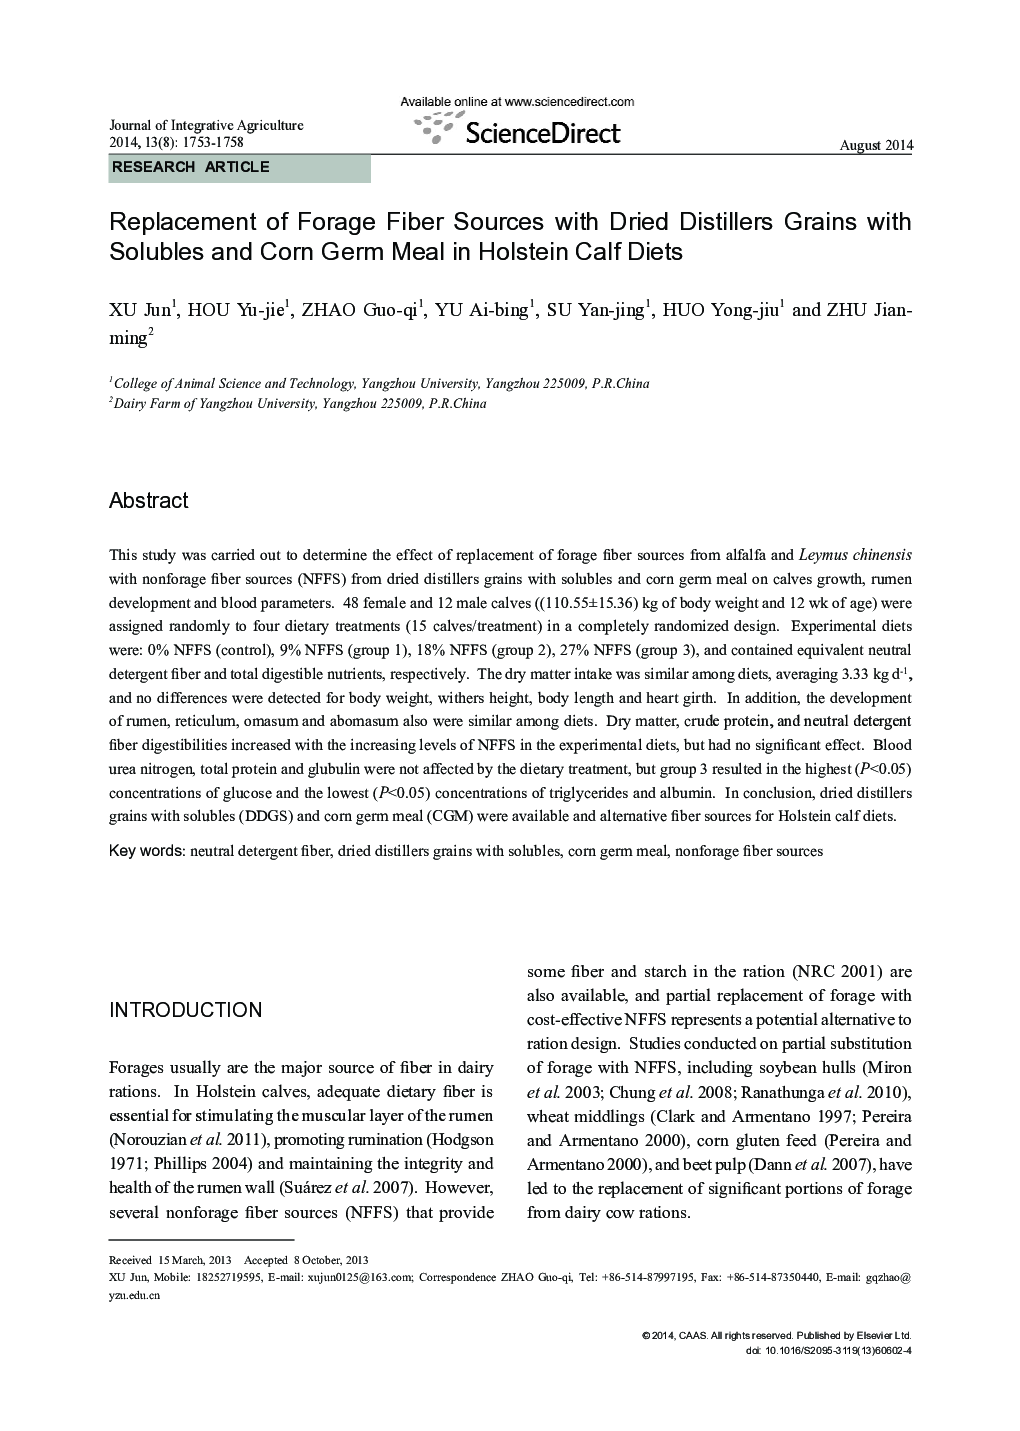 Replacement of Forage Fiber Sources with Dried Distillers Grains with Solubles and Corn Germ Meal in Holstein Calf Diets